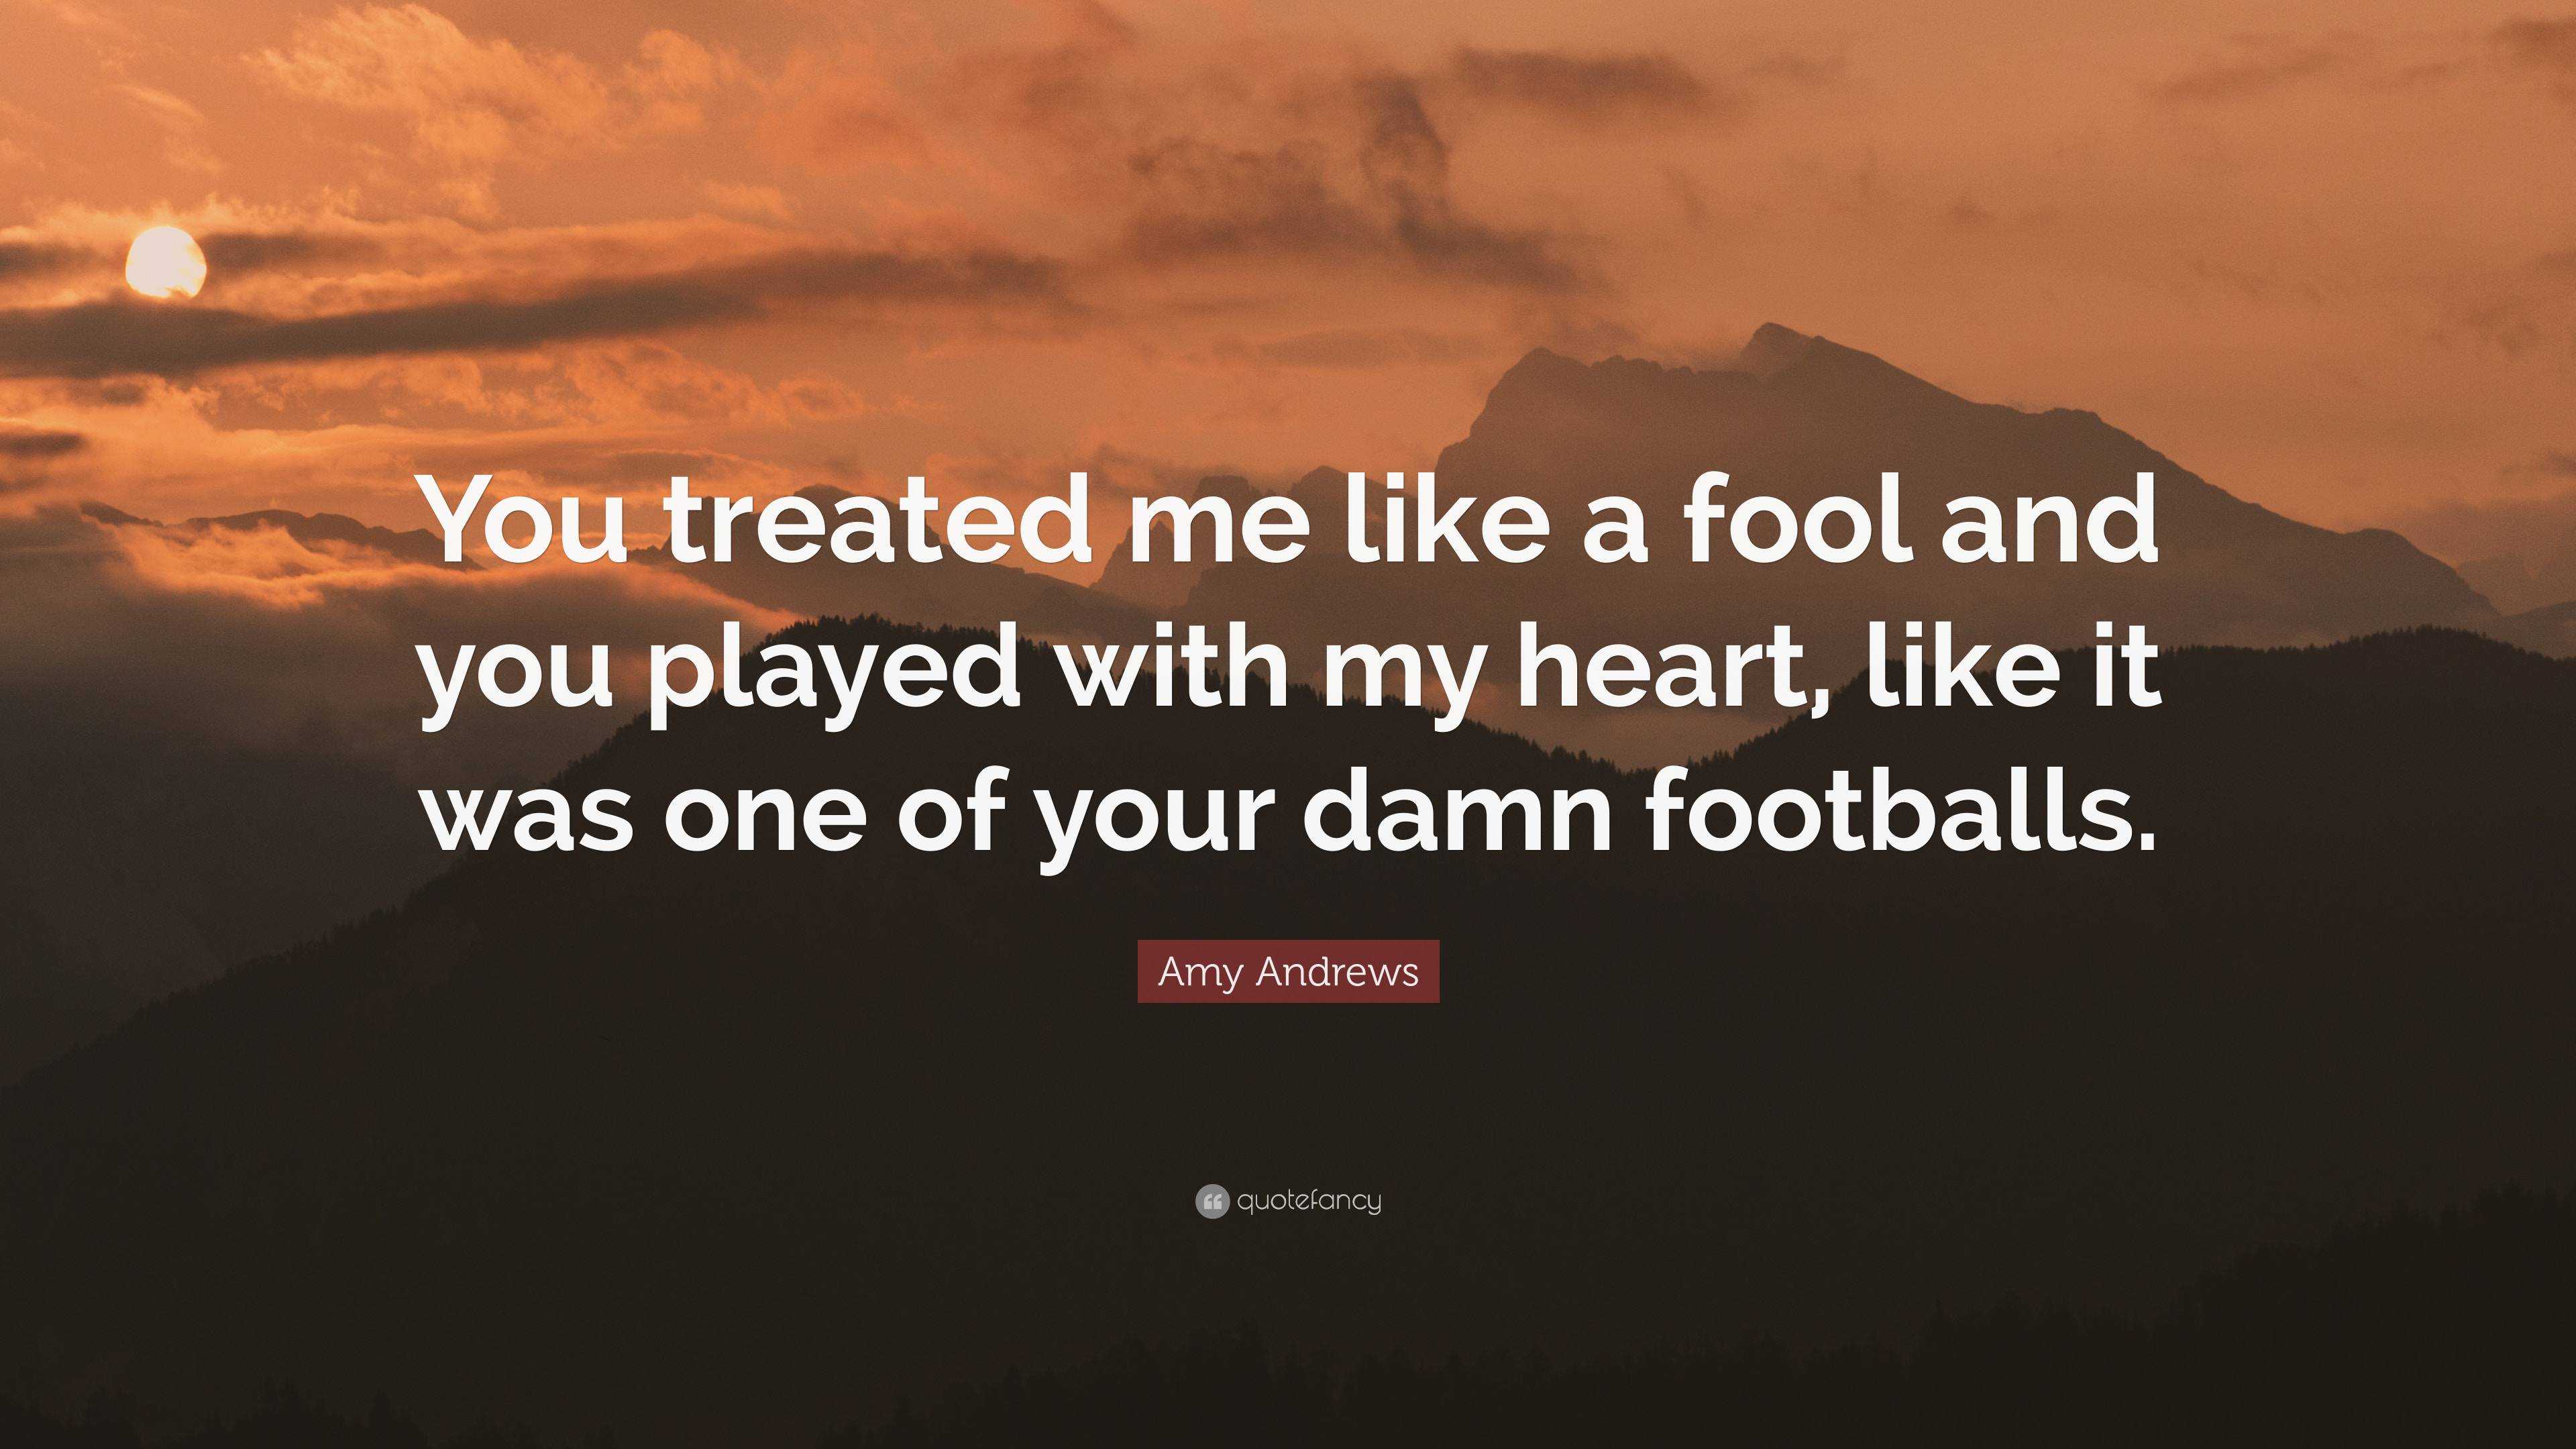 Amy Andrews Quote: “You treated me like a fool and you played with my  heart, like